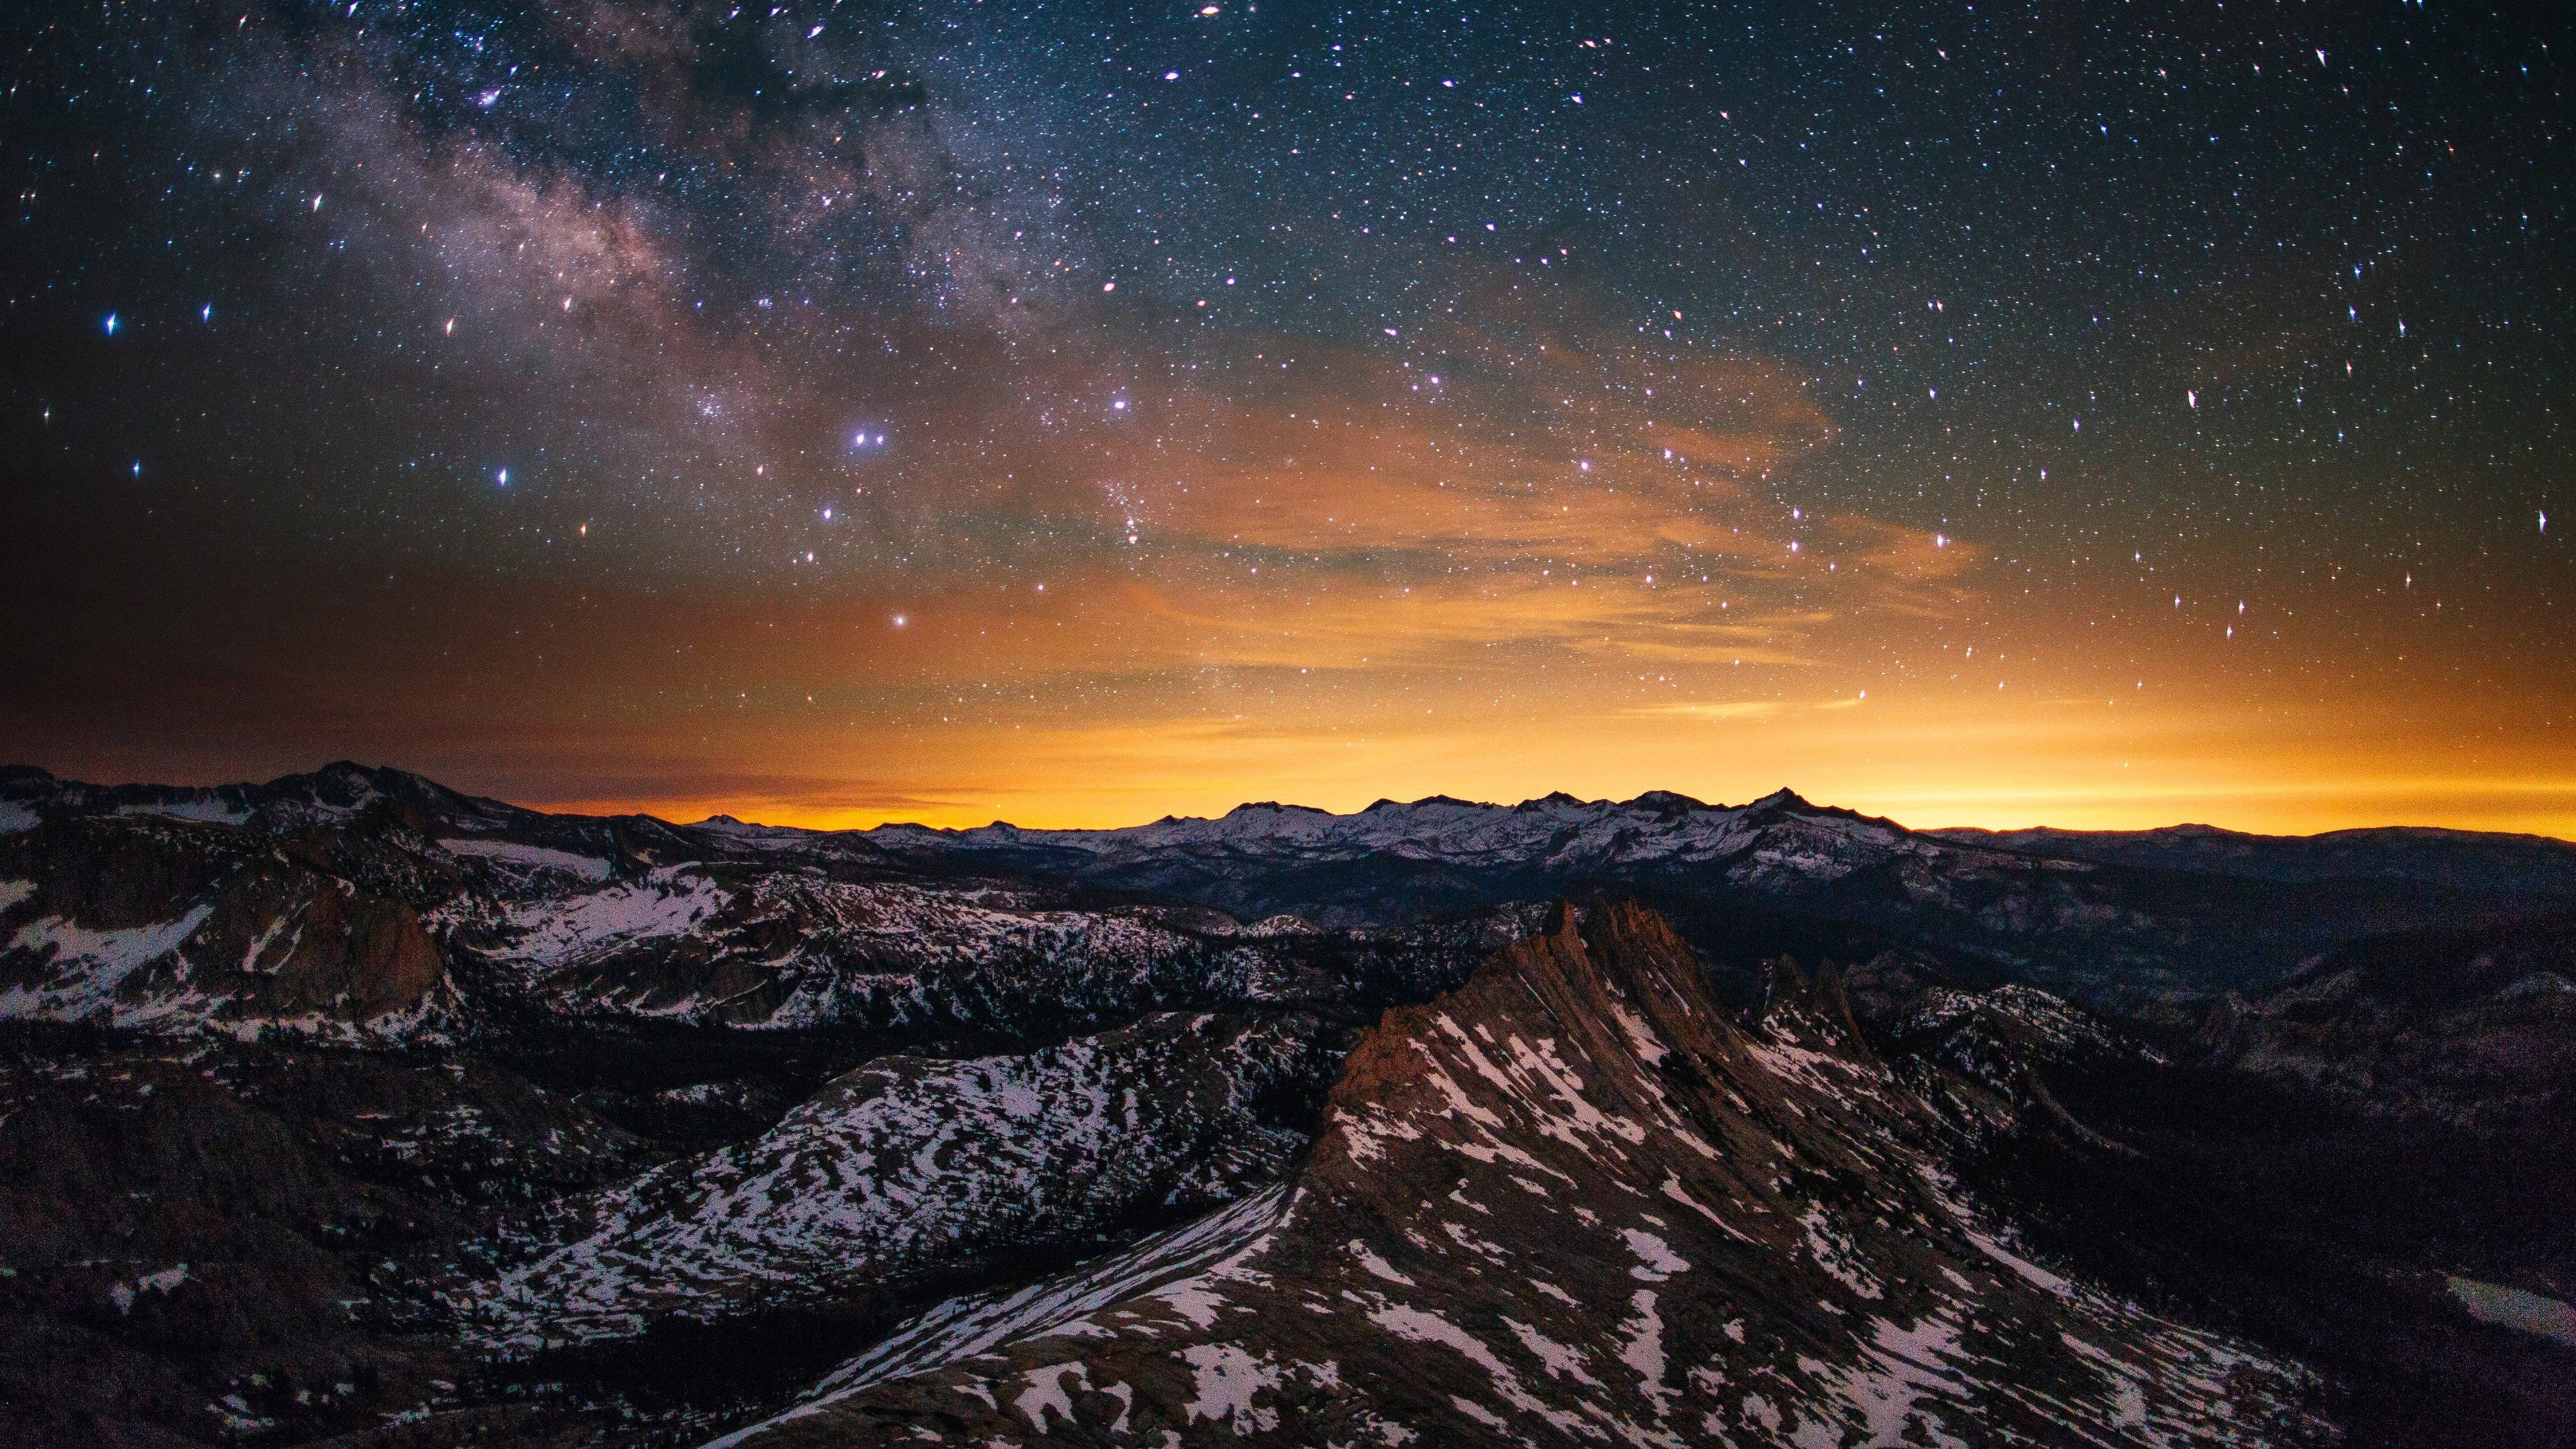 Sunrise Meets Starry Night In Awesome HD Wallpaper